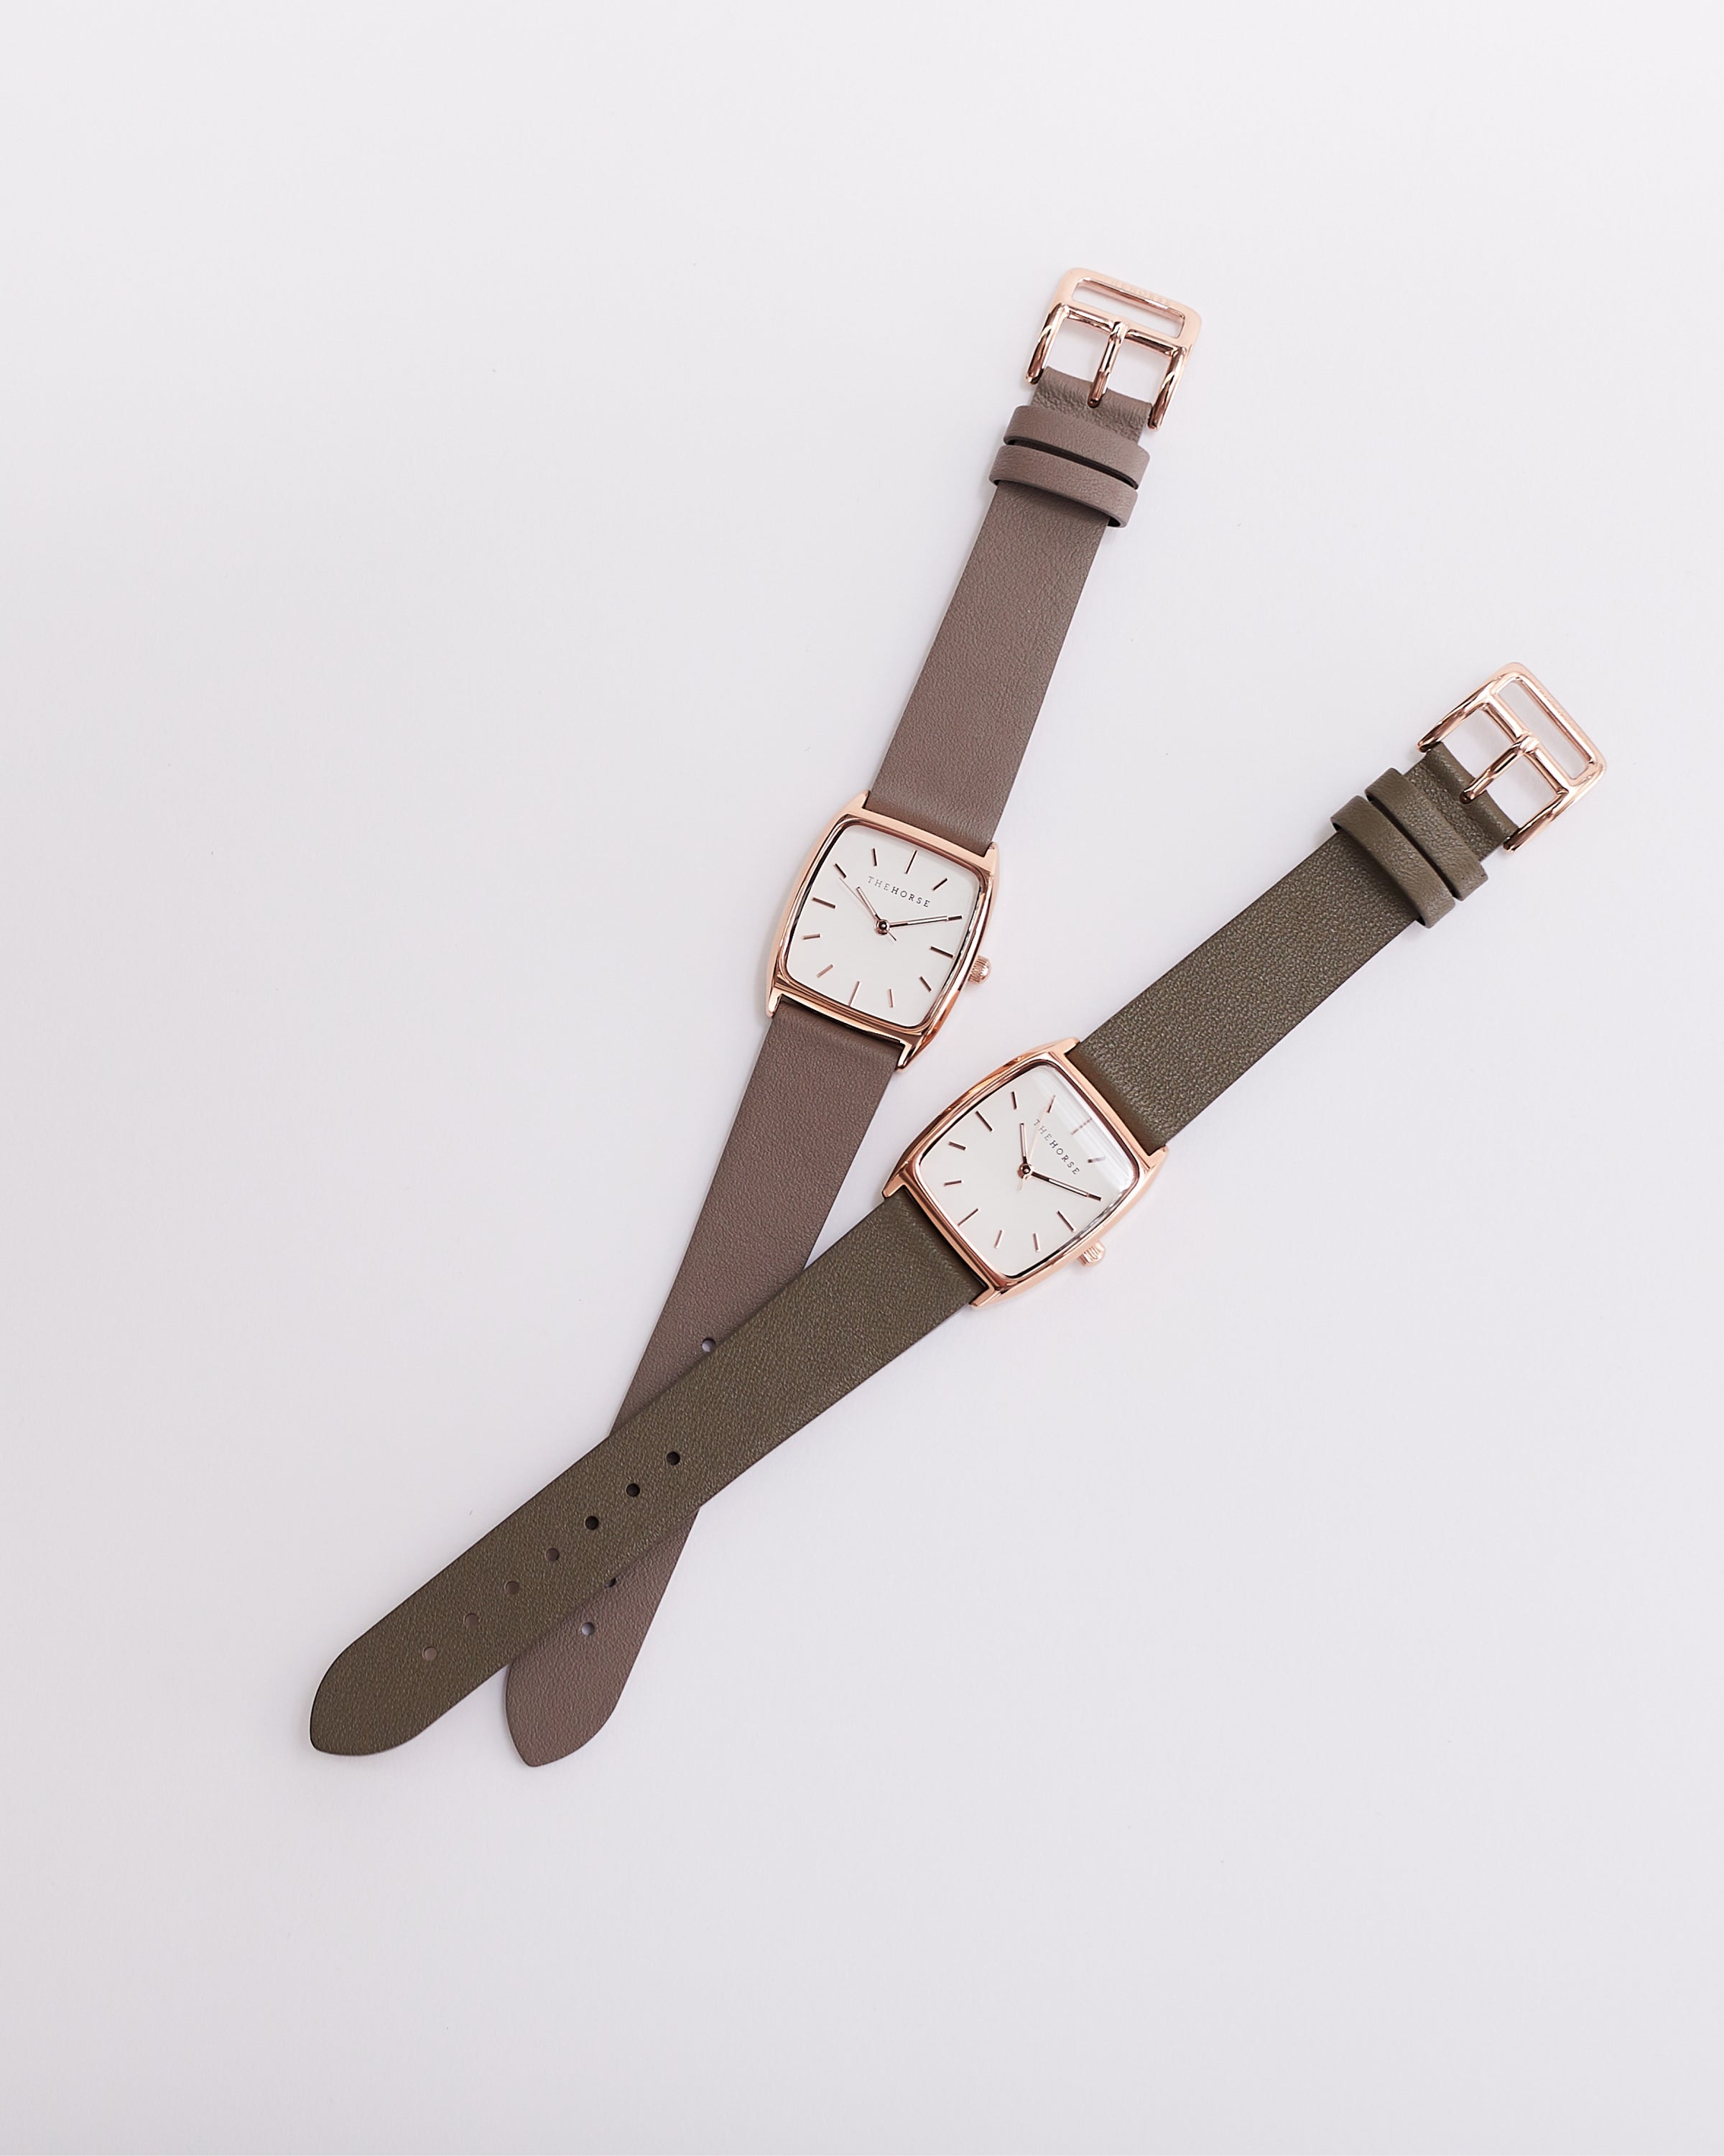 The Dress Watch: Rose Gold / White Dial / Olive Leather